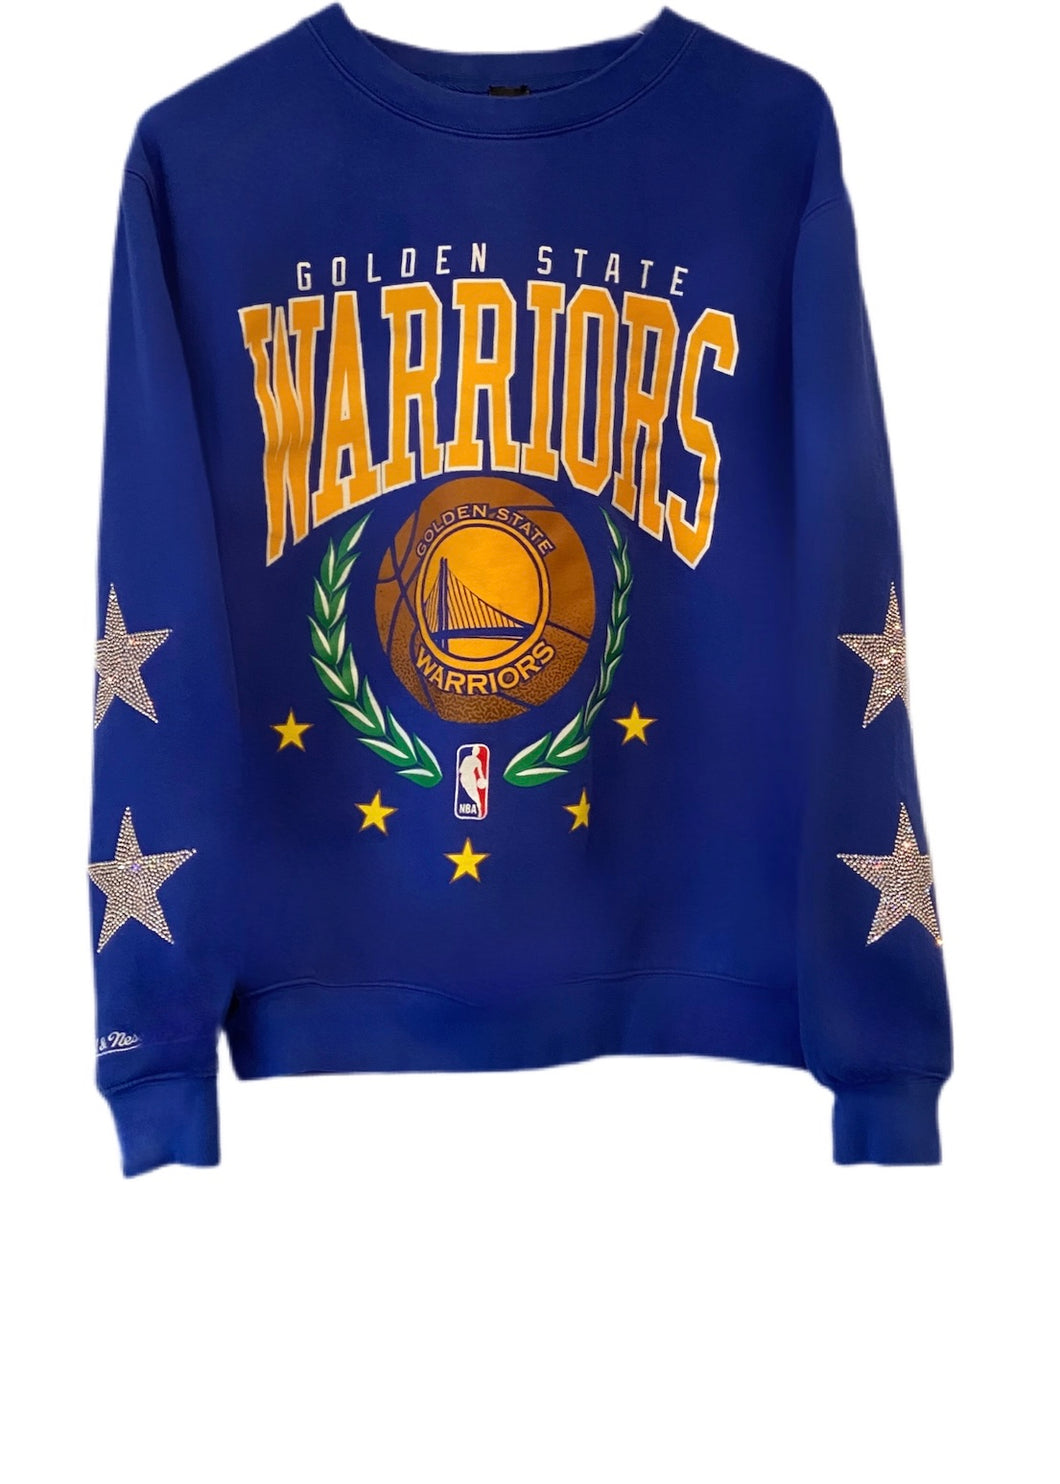 Golden State Warriors, NBA One of a KIND Vintage Sweatshirt with Crystal Star Design